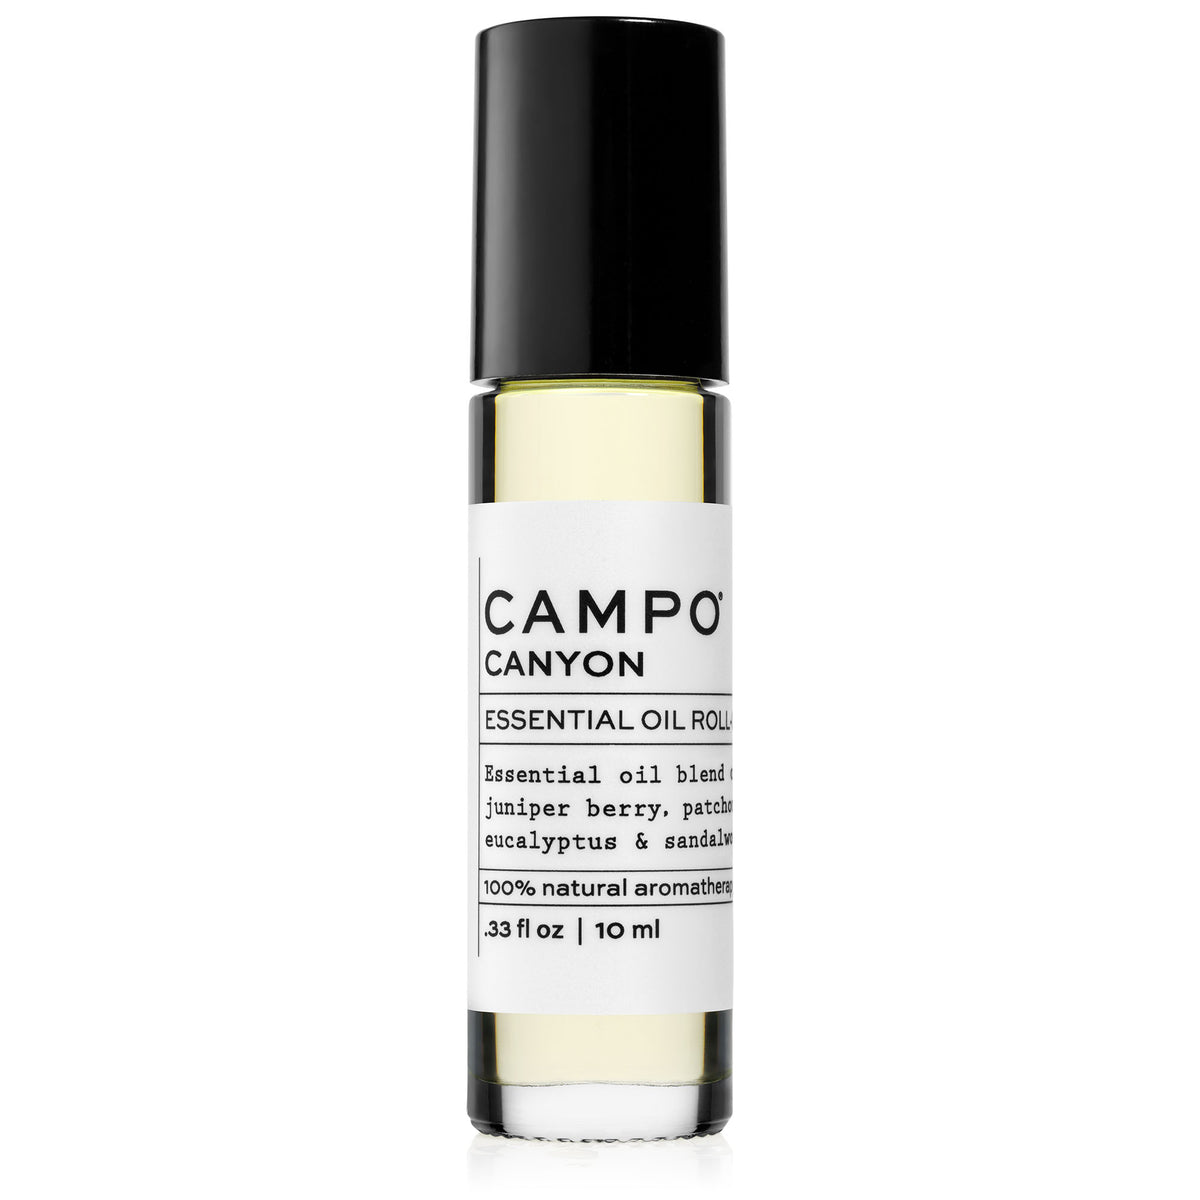 WOODS Beauty Essential Oil CANYON Roll-On in 10 ml. Escape to the canyon with this 100% pure essential oil blend of juniper berry, patchouli, eucalyptus radiate, and sandalwood. Inspired by hikes through rustling eucalyptus, juniper berry &amp; patchouli-filled mountains.